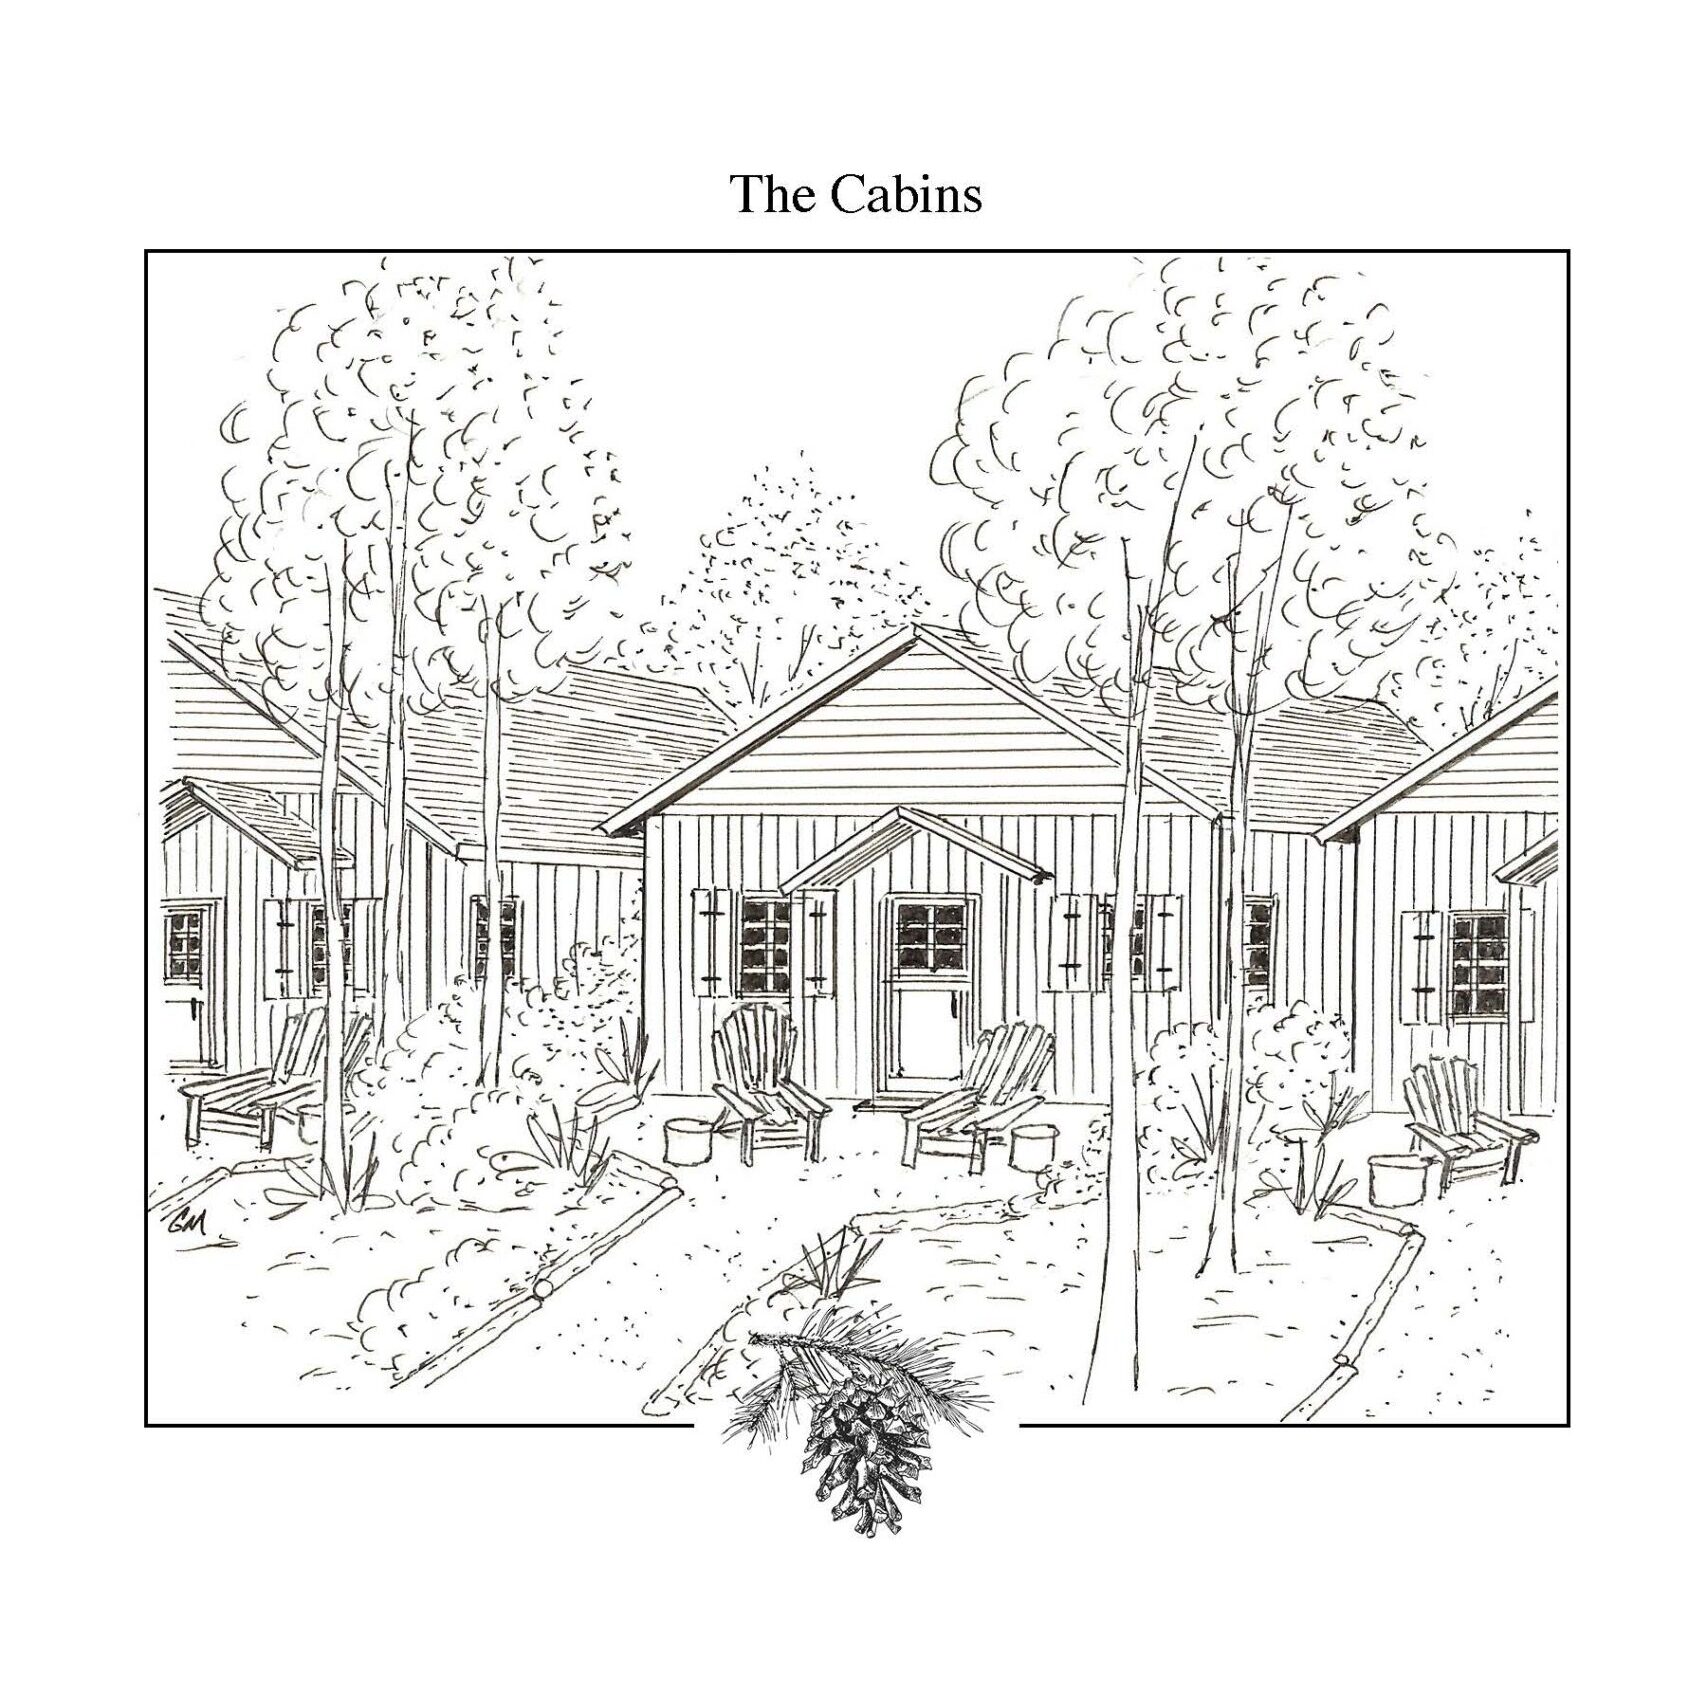 Sketch of the Cabins